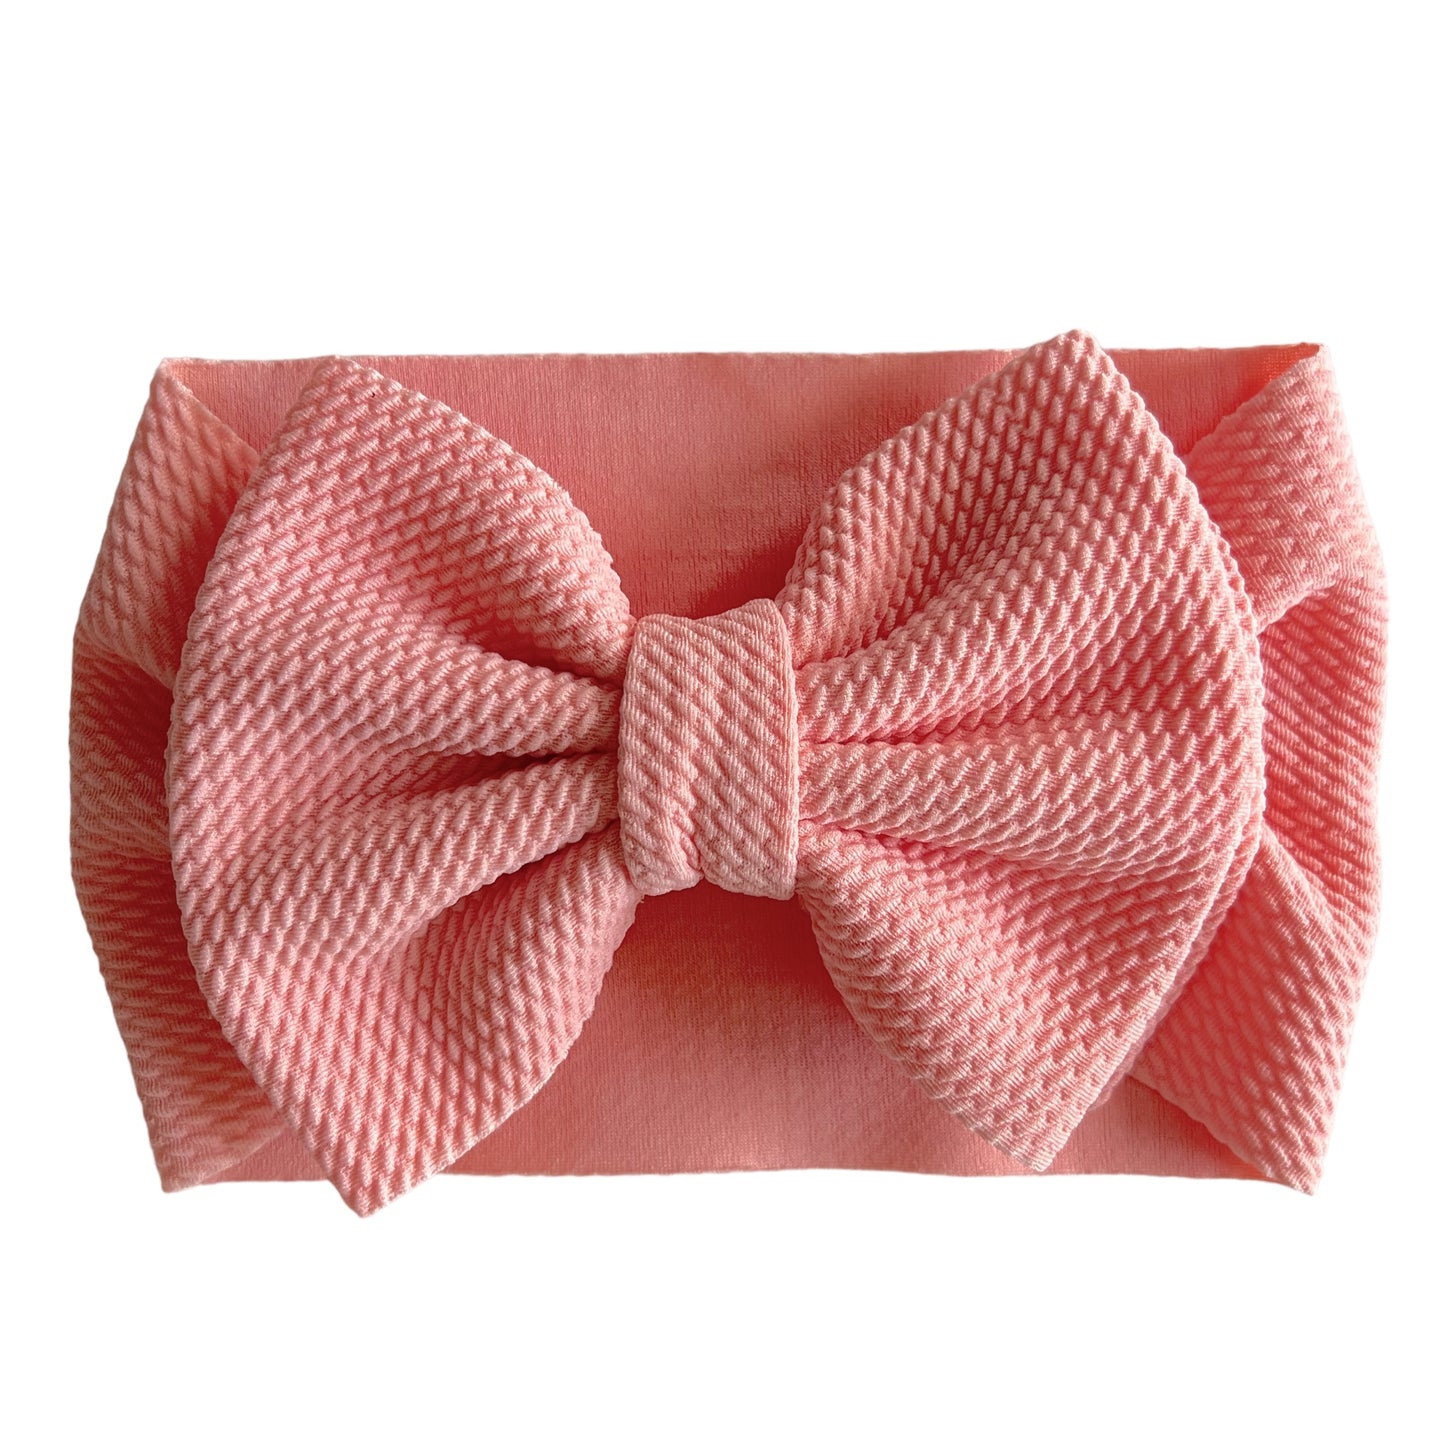 The BIG Bow, Peach Pink